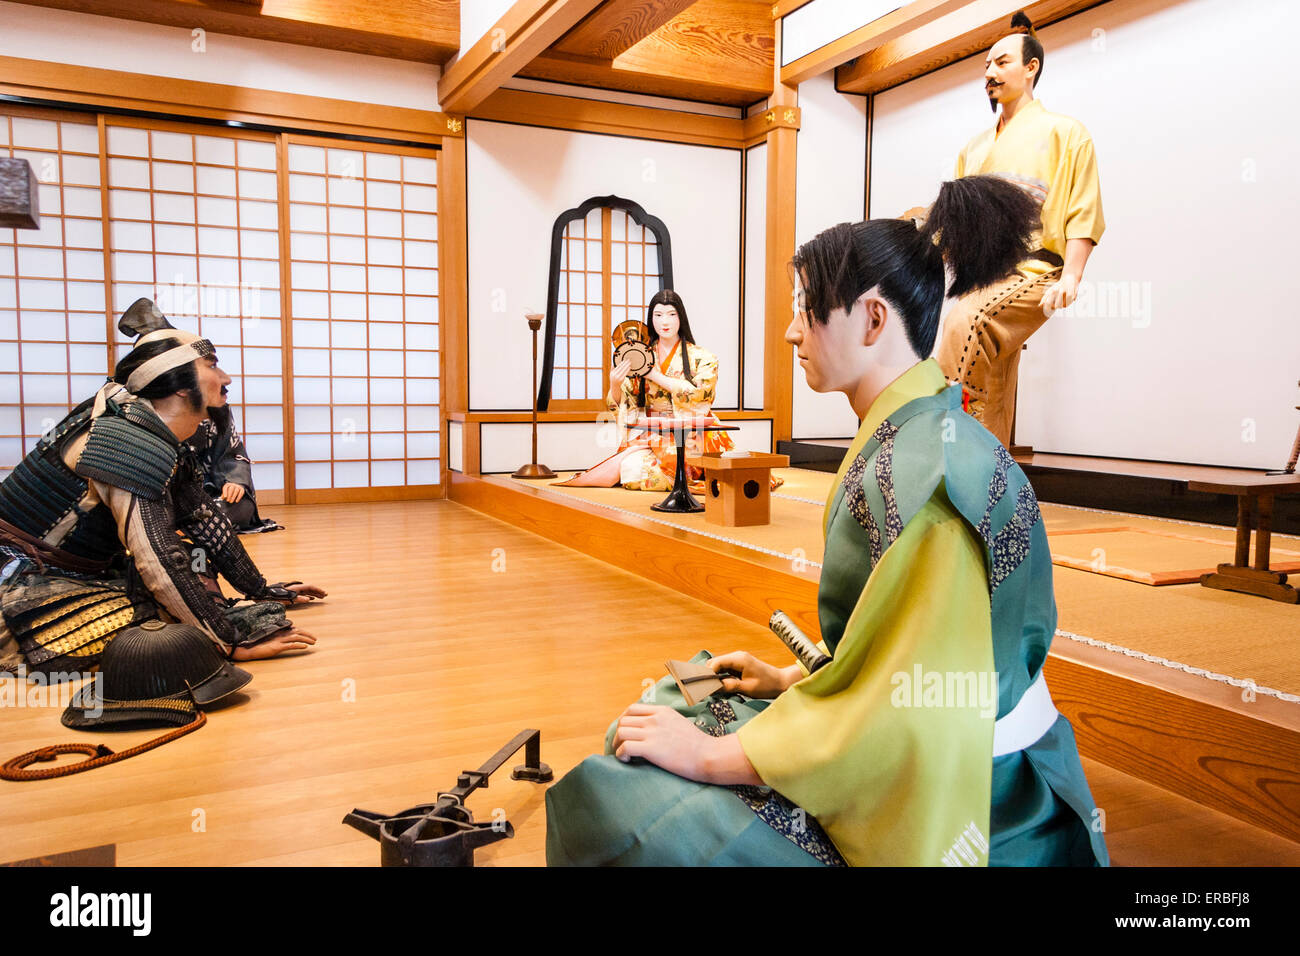 Interior of the keep at Kiyosu castle in Nagoya. Reconstructed scene, courtiers kneeling in front of the Daimyo, warlord, during an audience. Stock Photo